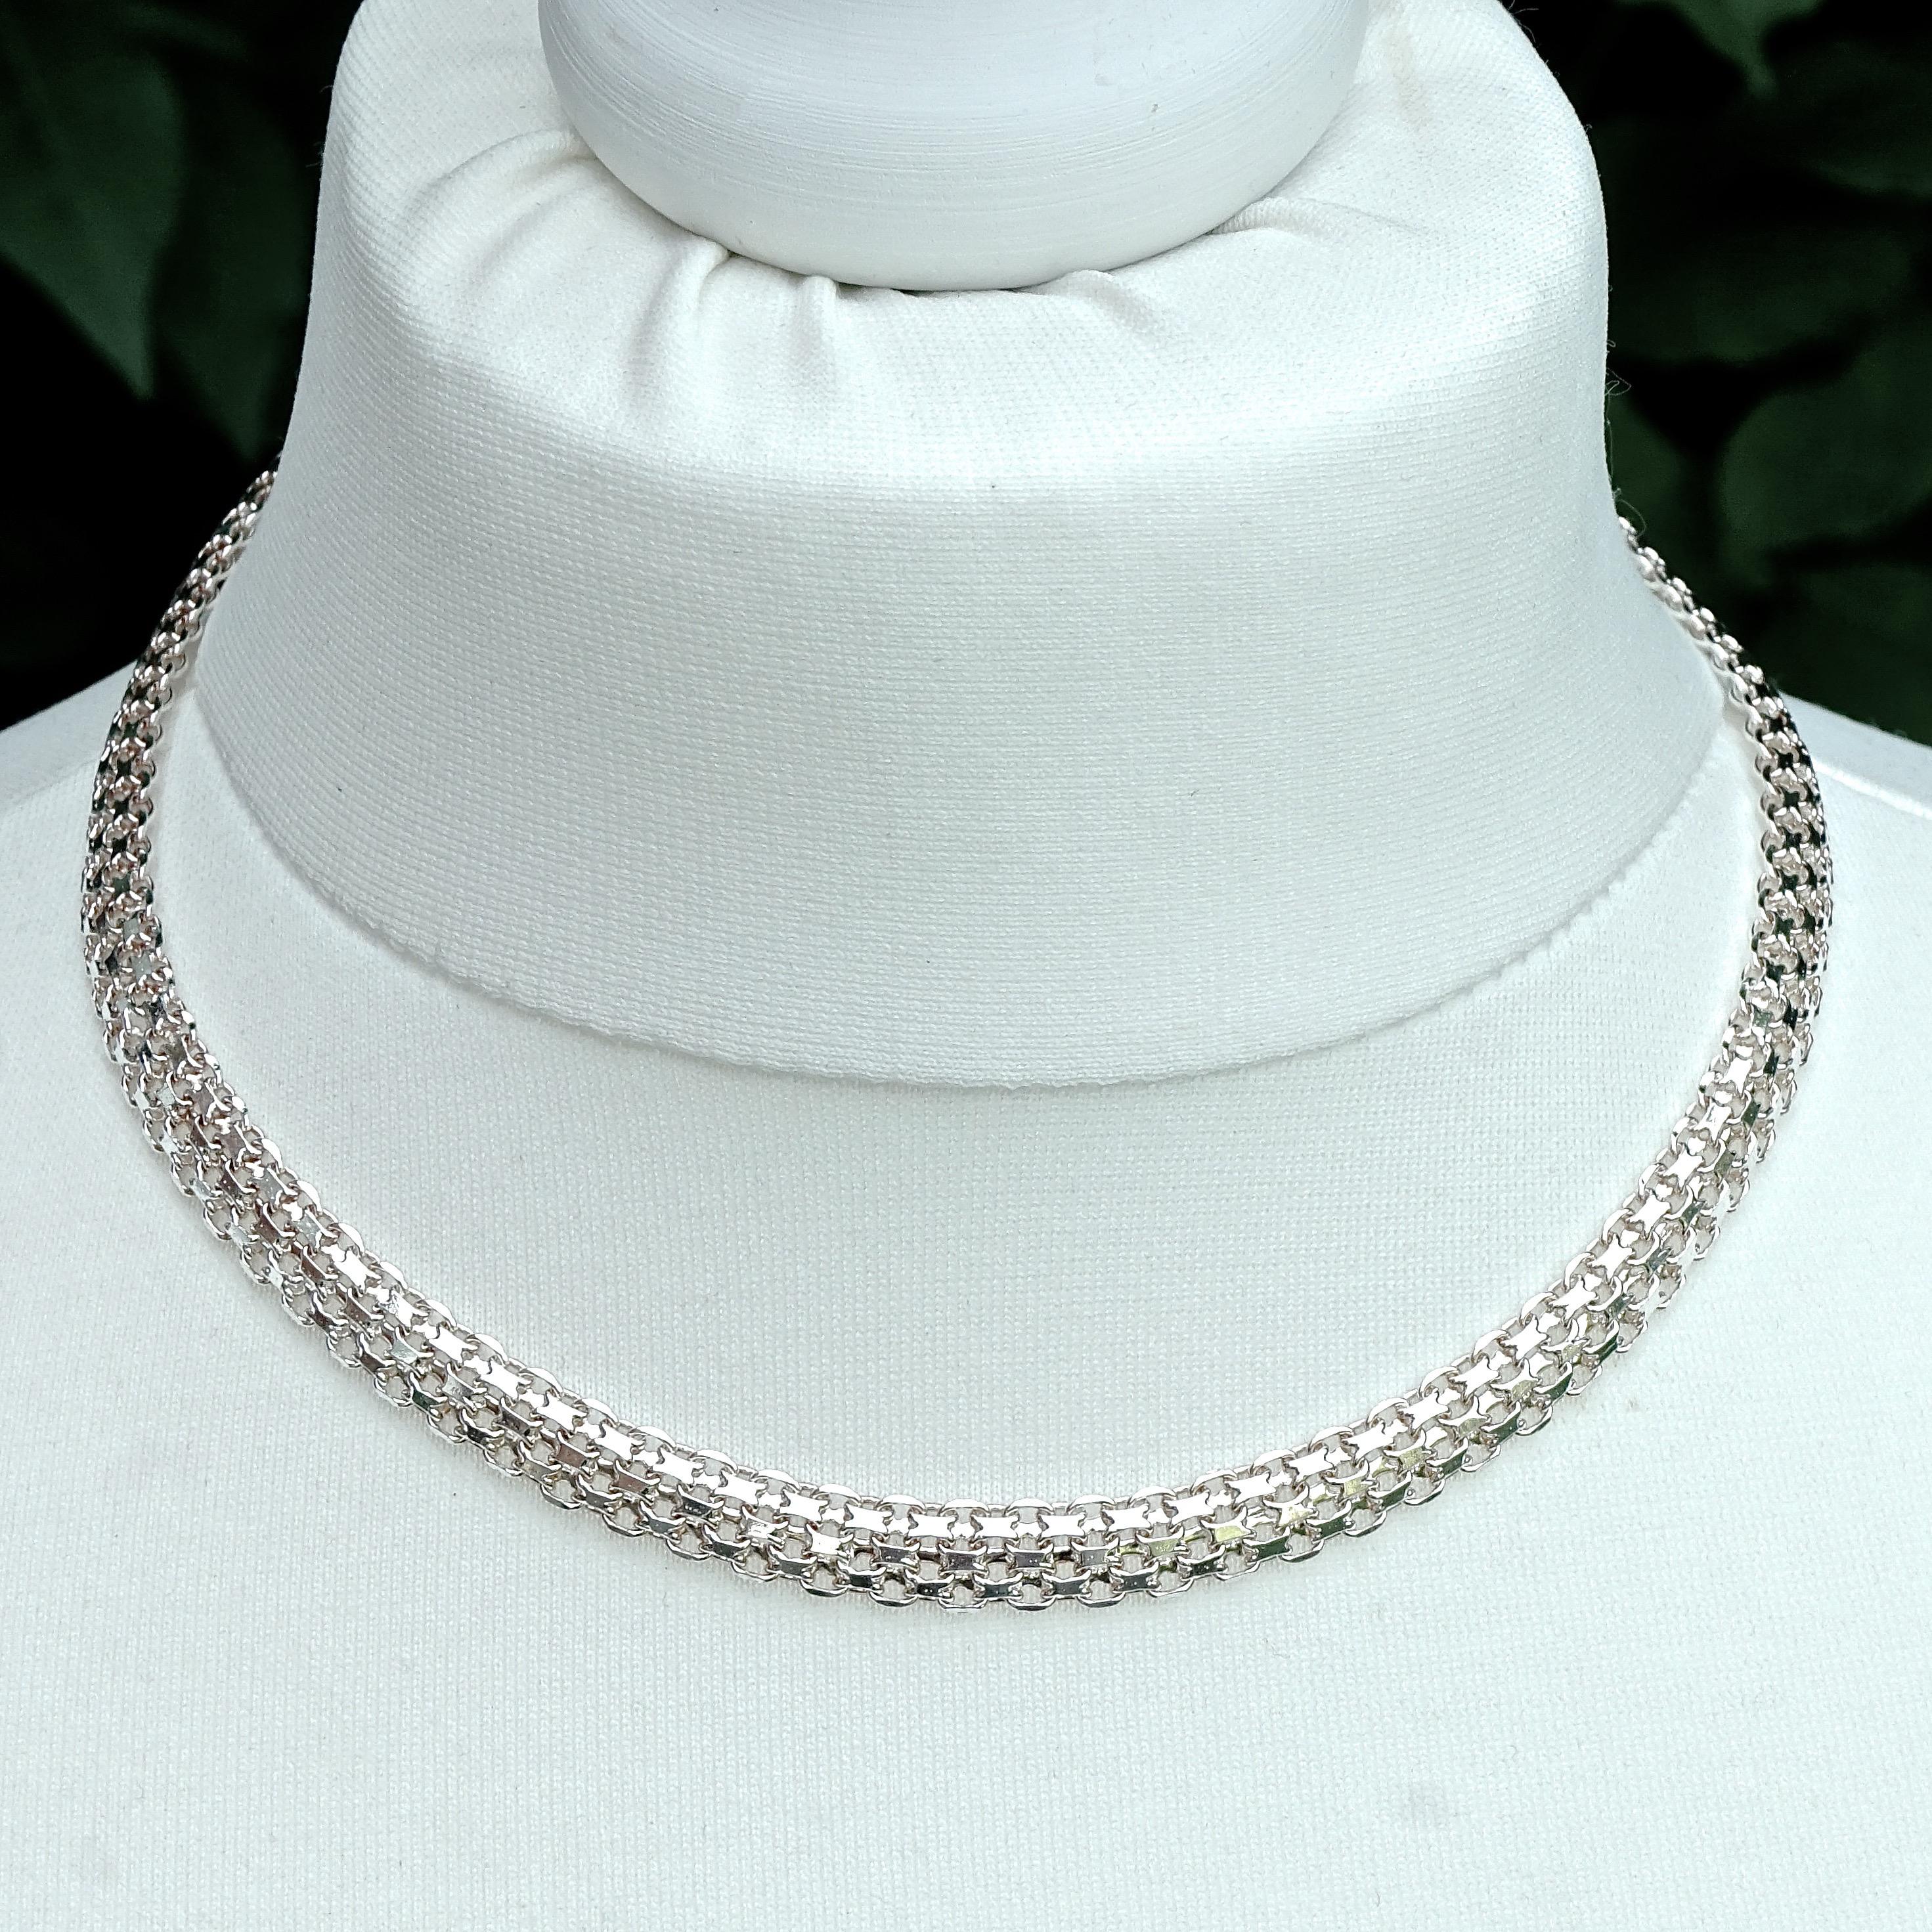 Milor beautiful polished sterling silver mesh link necklace, with a large ring bolt clasp. Length 43.5cm / 17.1 inches by width 8mm / .3 inch. The necklace is in very good condition.

This is a stylish Italian sterling silver chain necklace to wear